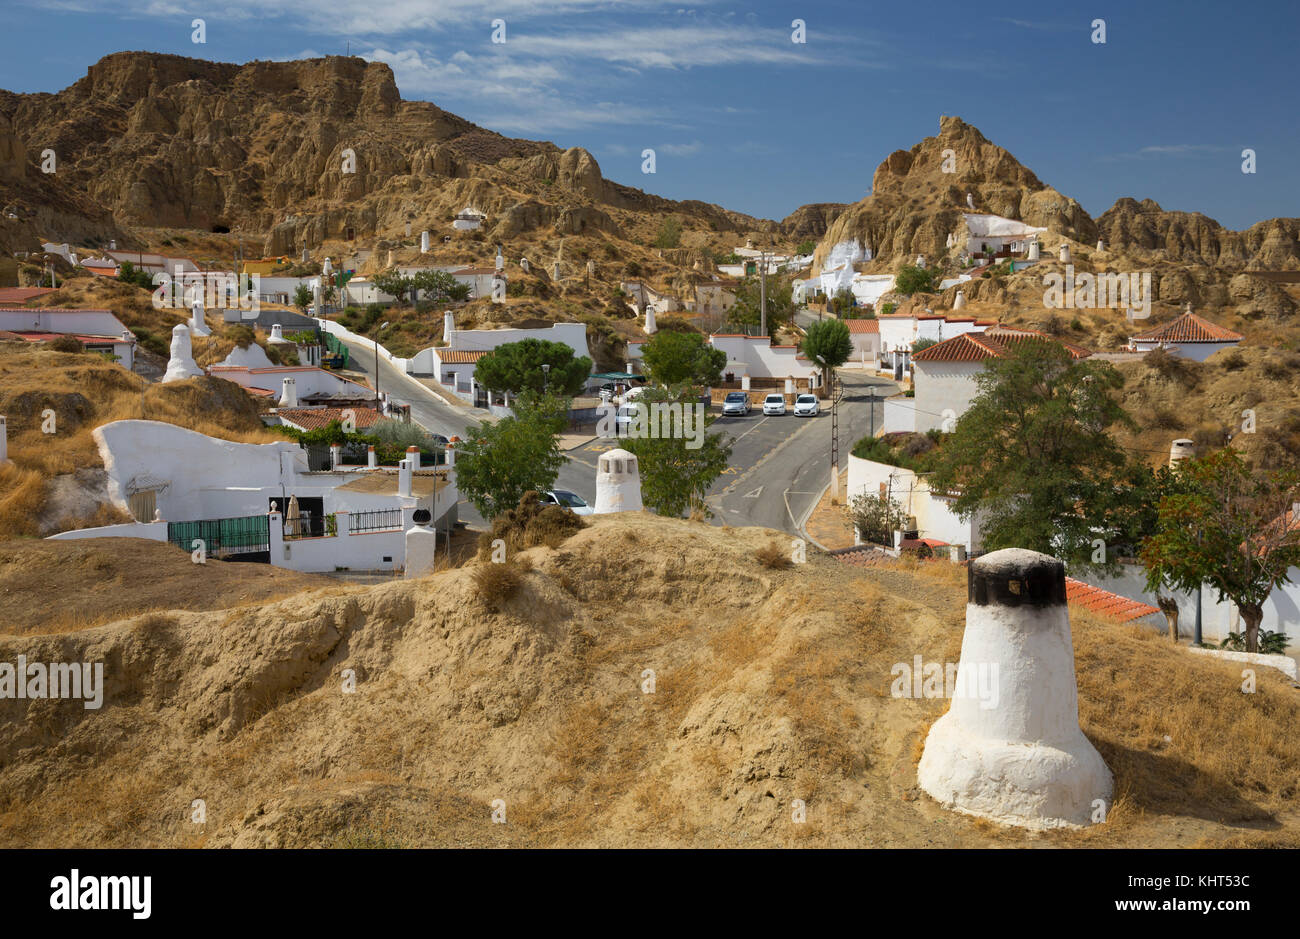 Underground cave dwellings in Guadix, Southern Spain Stock Photo